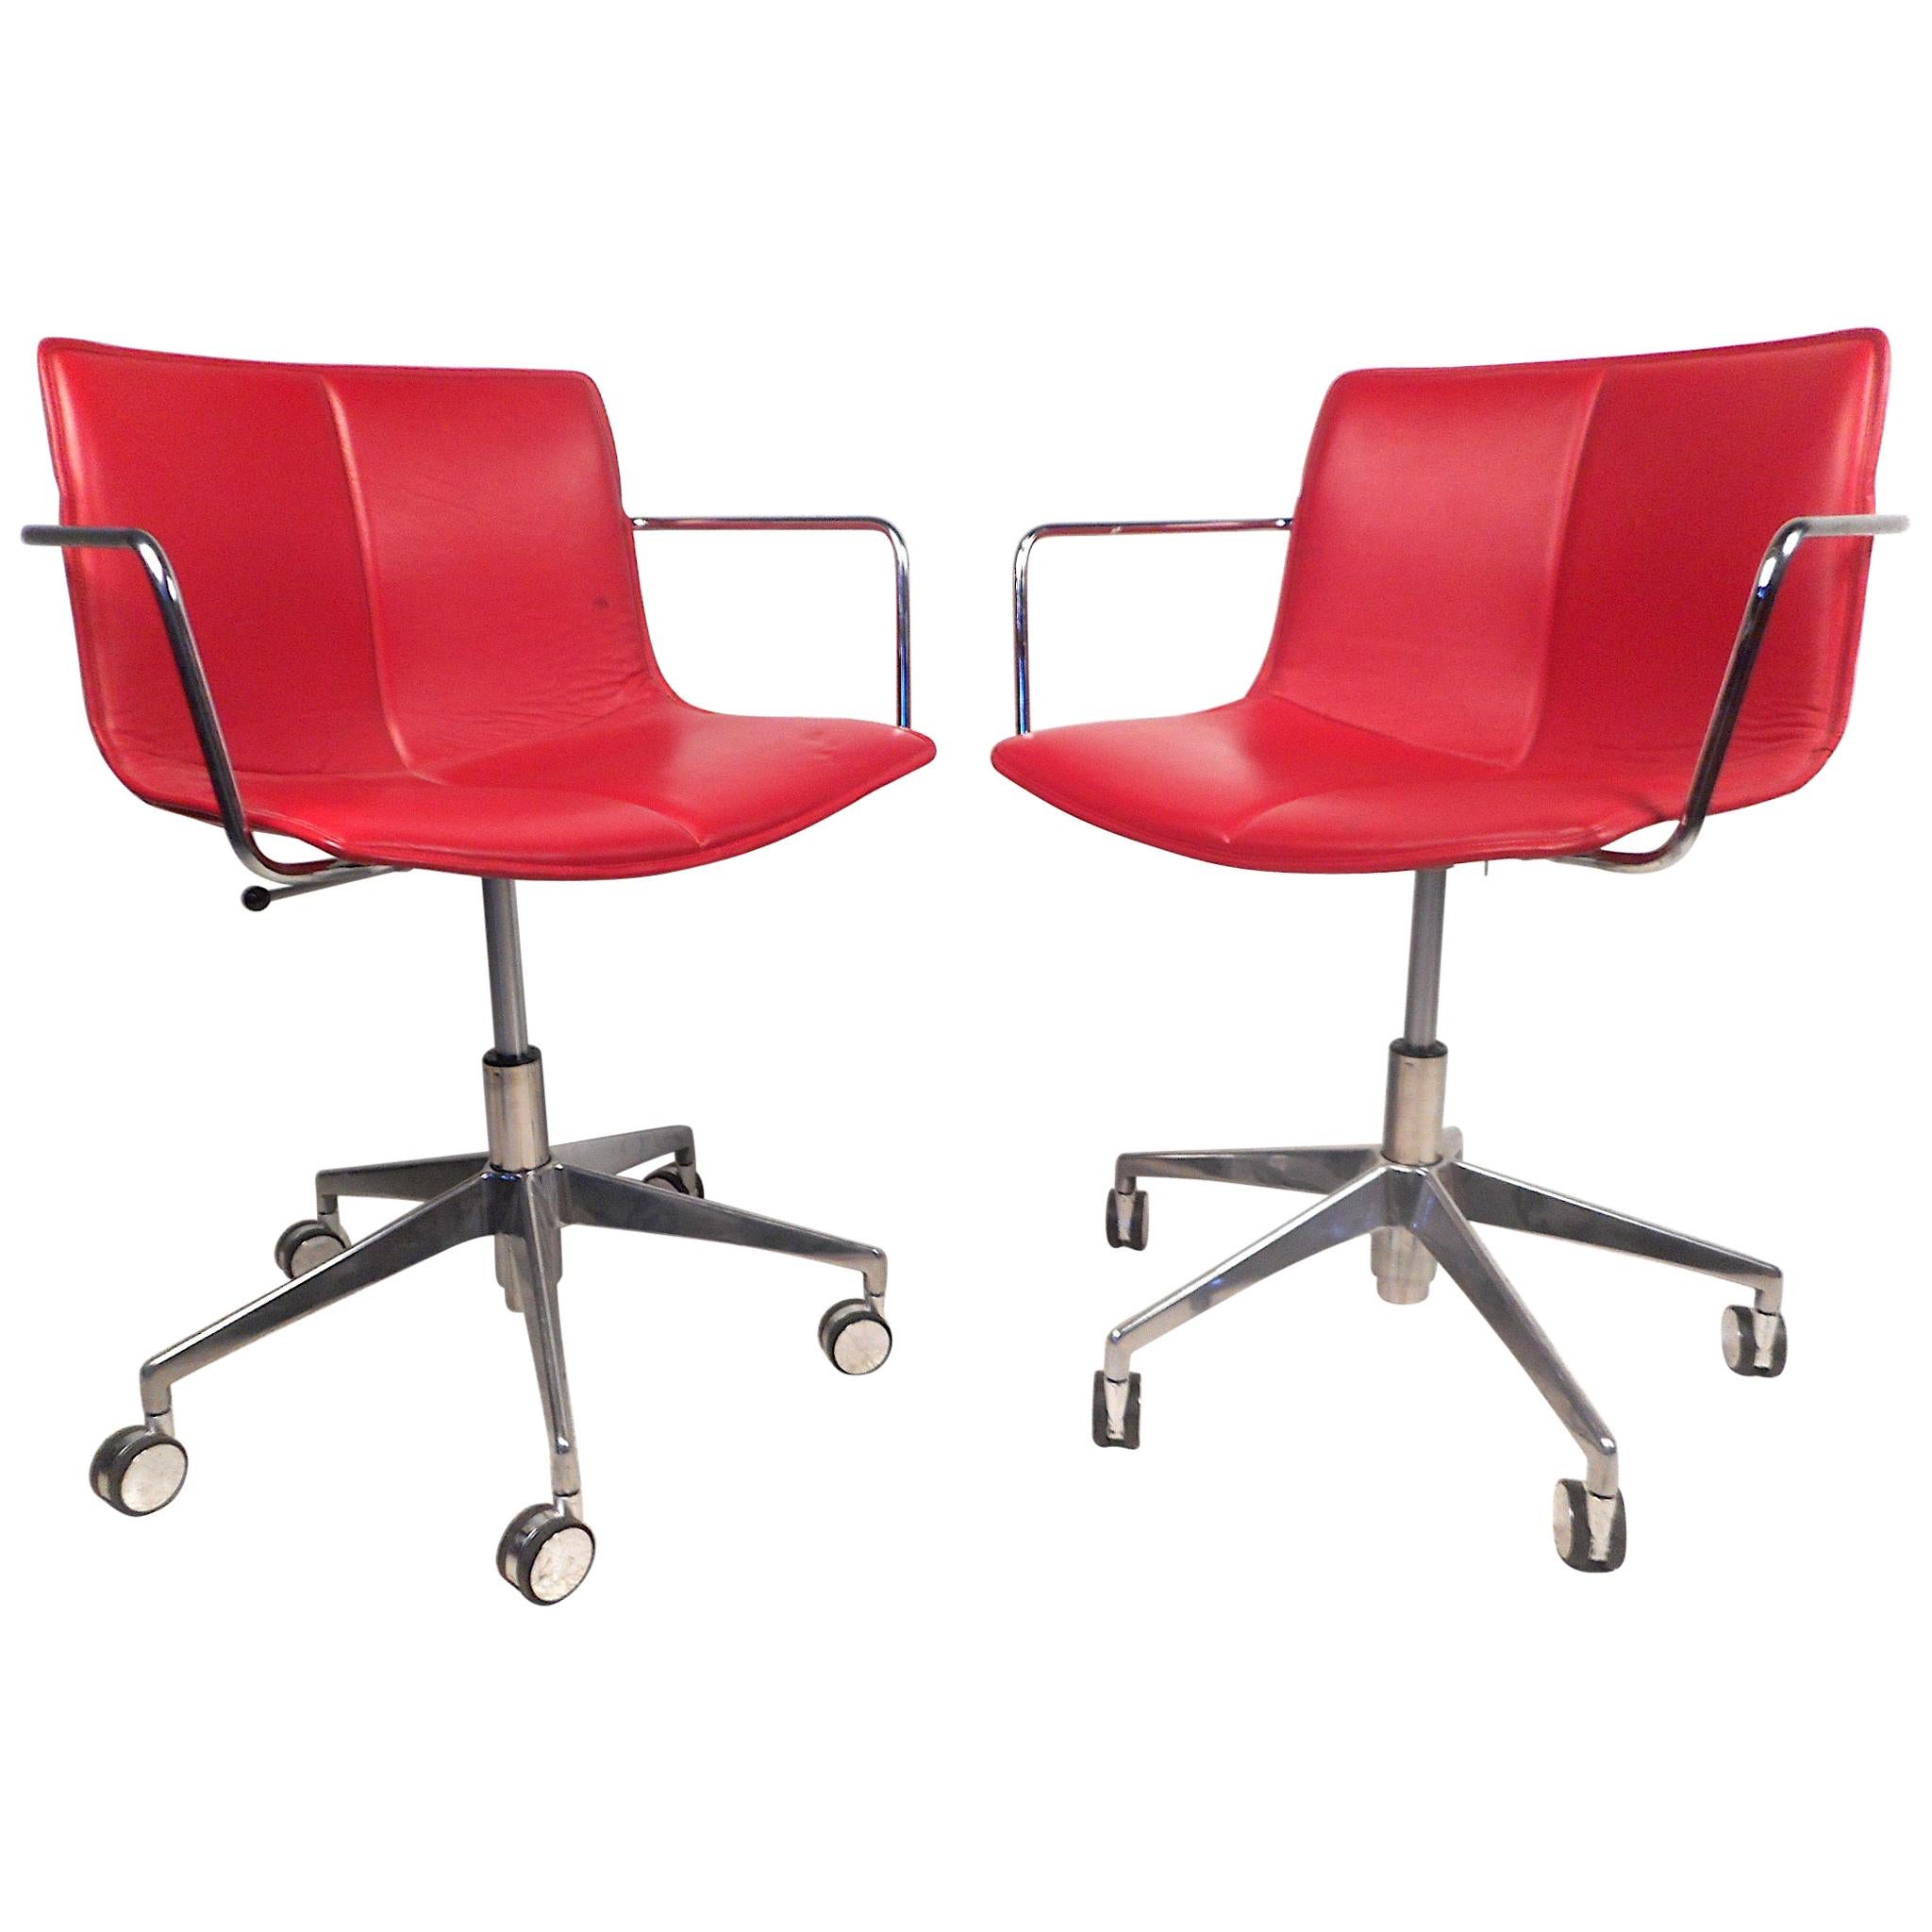 Contemporary Modern Adjustable Swivel Chairs, a Pair